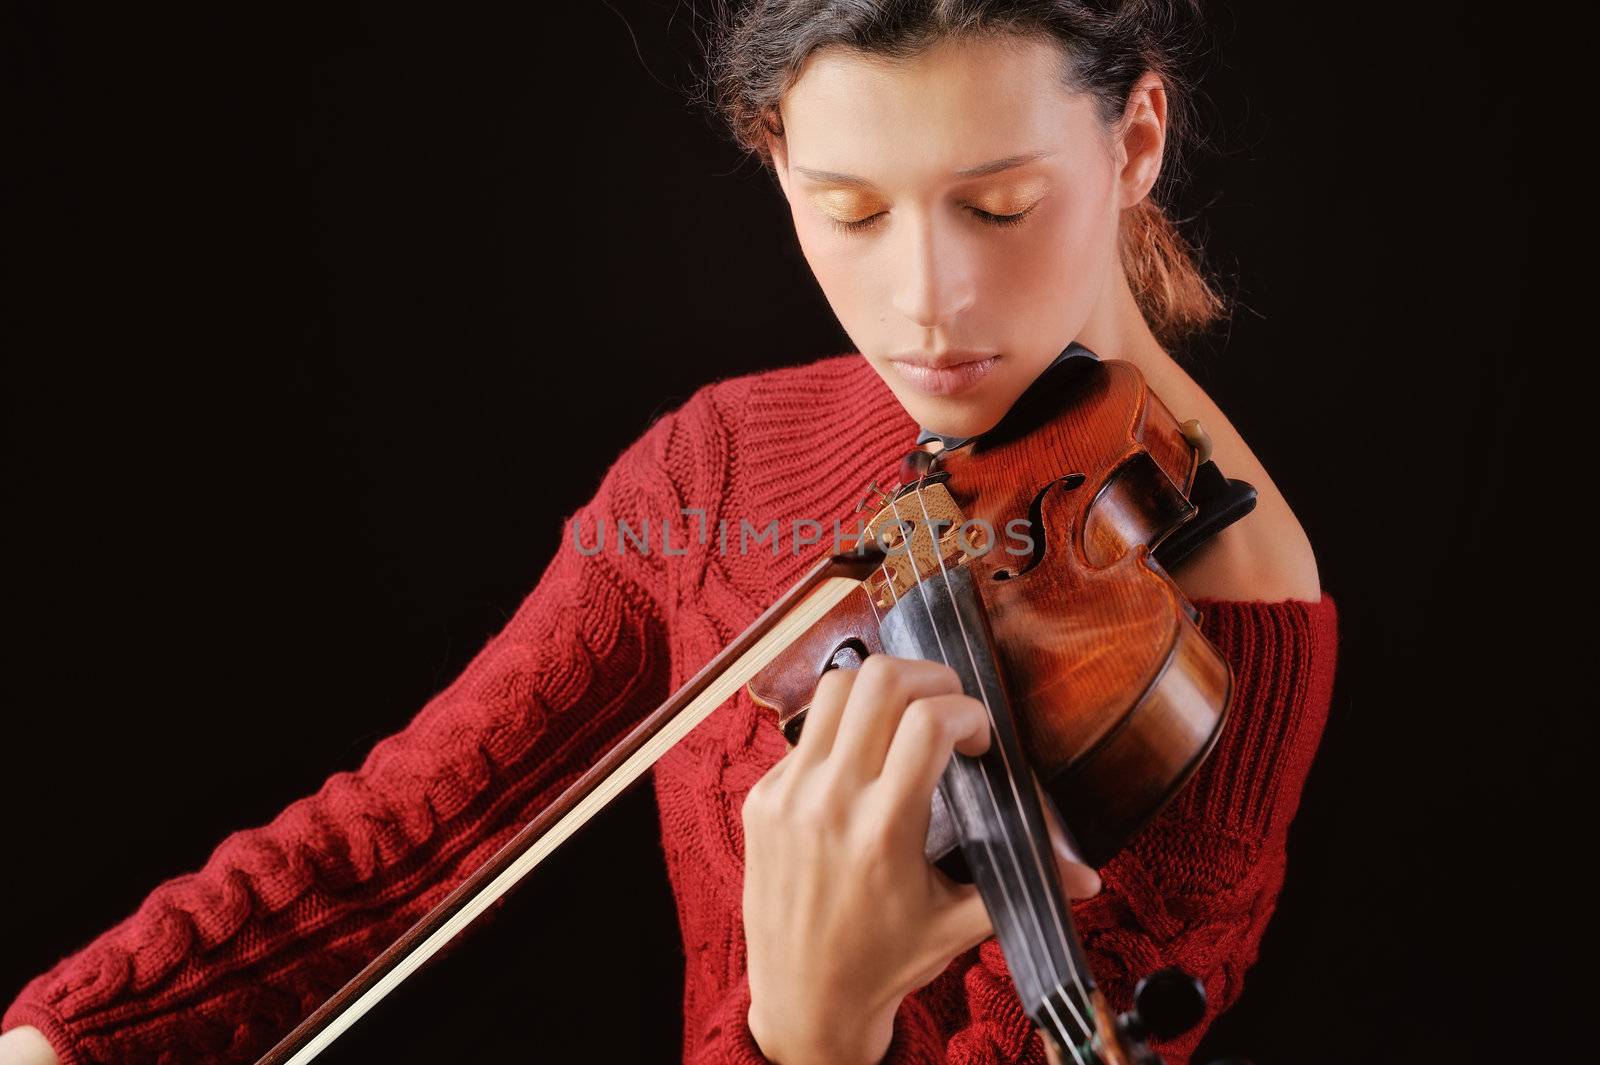 A young woman playing a violin with expression